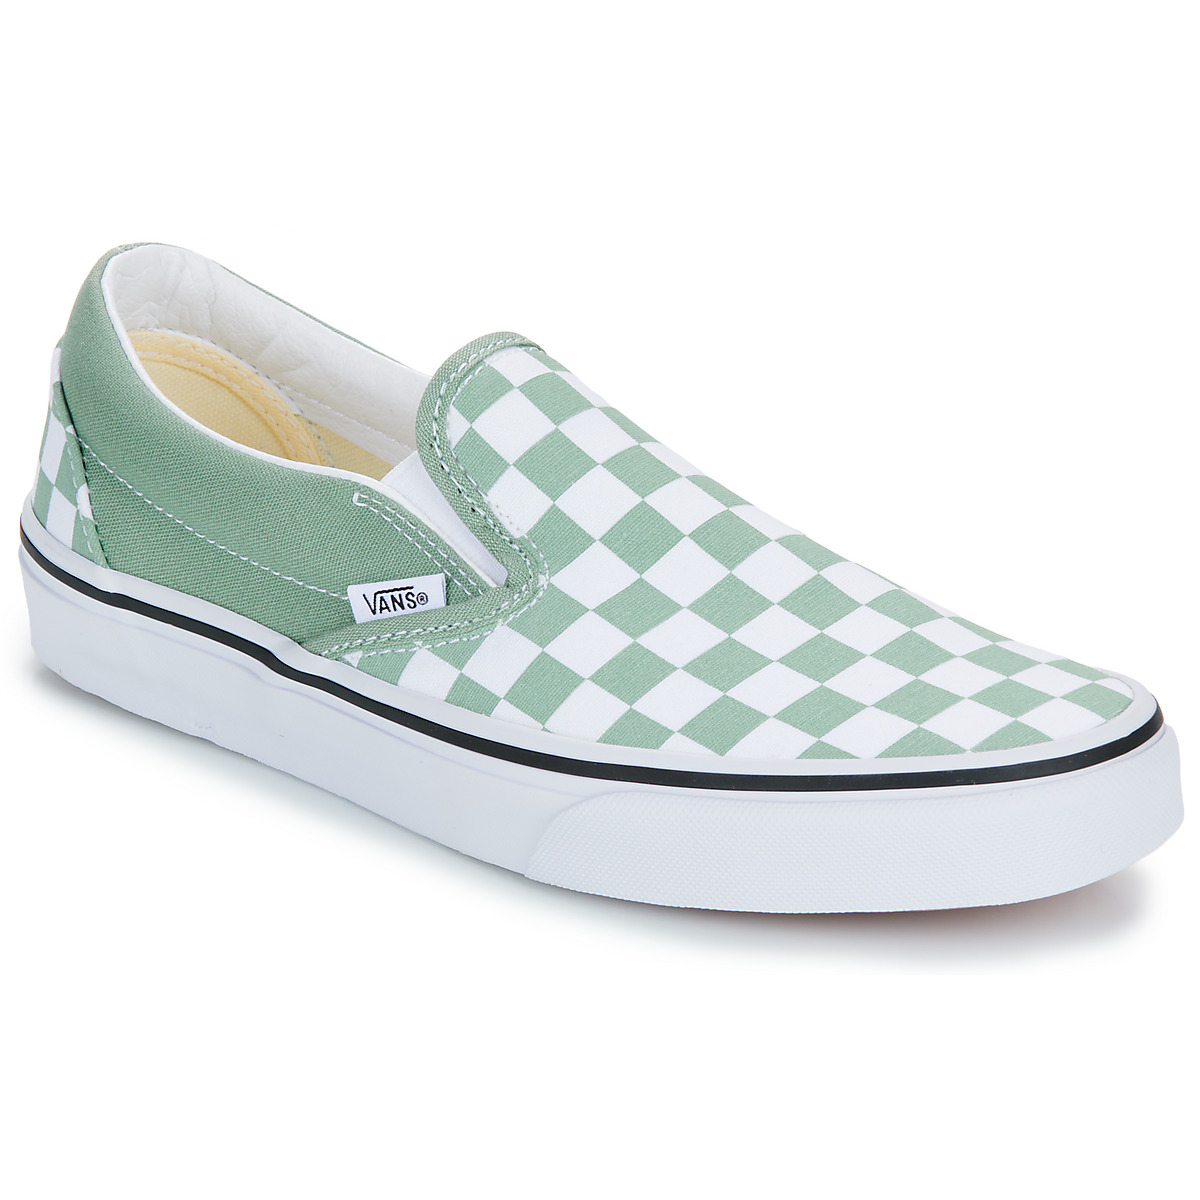 Slip on Vans Classic Slip-On COLOR THEORY CHECKERBOARD ICEBERG GREEN